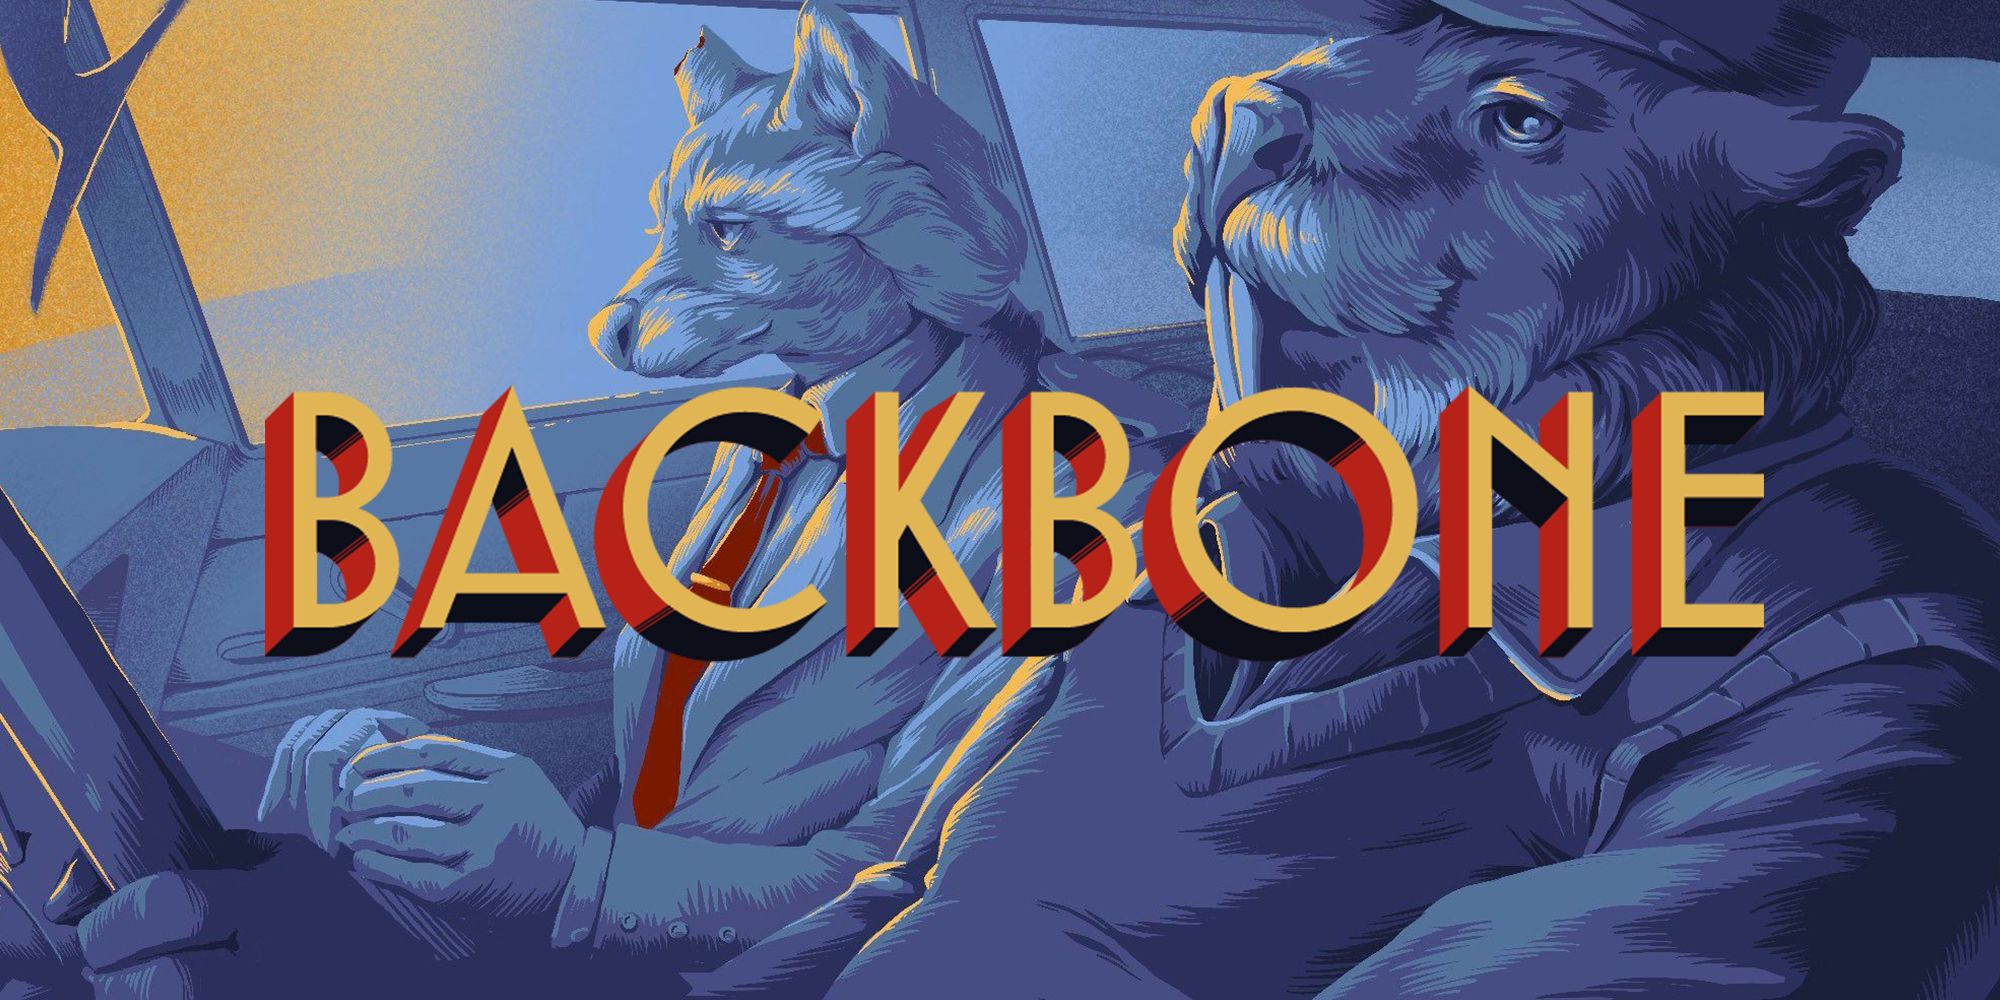 backbone playstation edition review